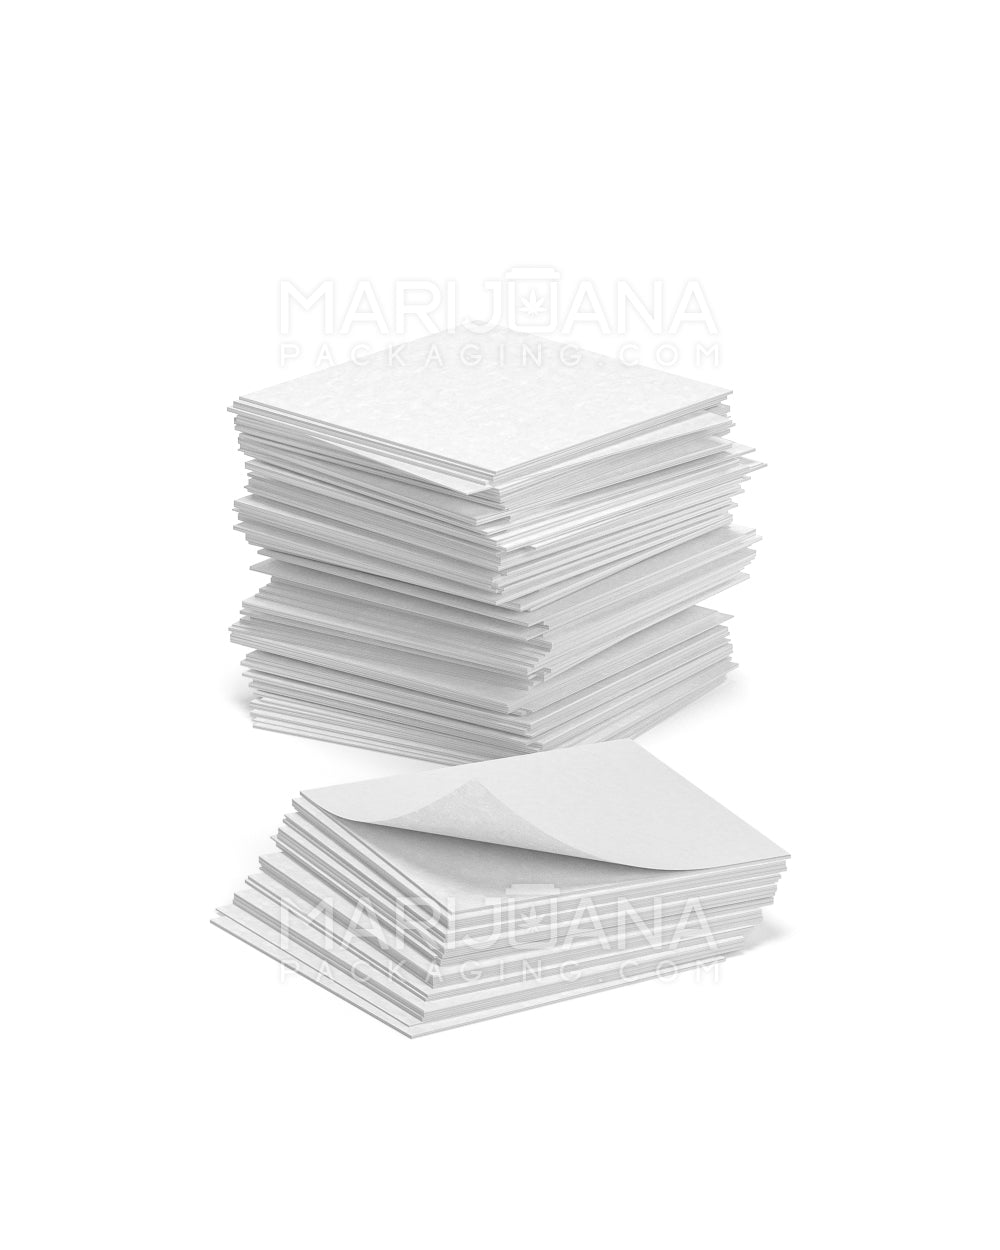 Non Silicone Coated Parchment Paper | 4in x 4in - Bleached White - 1000 Count - 4